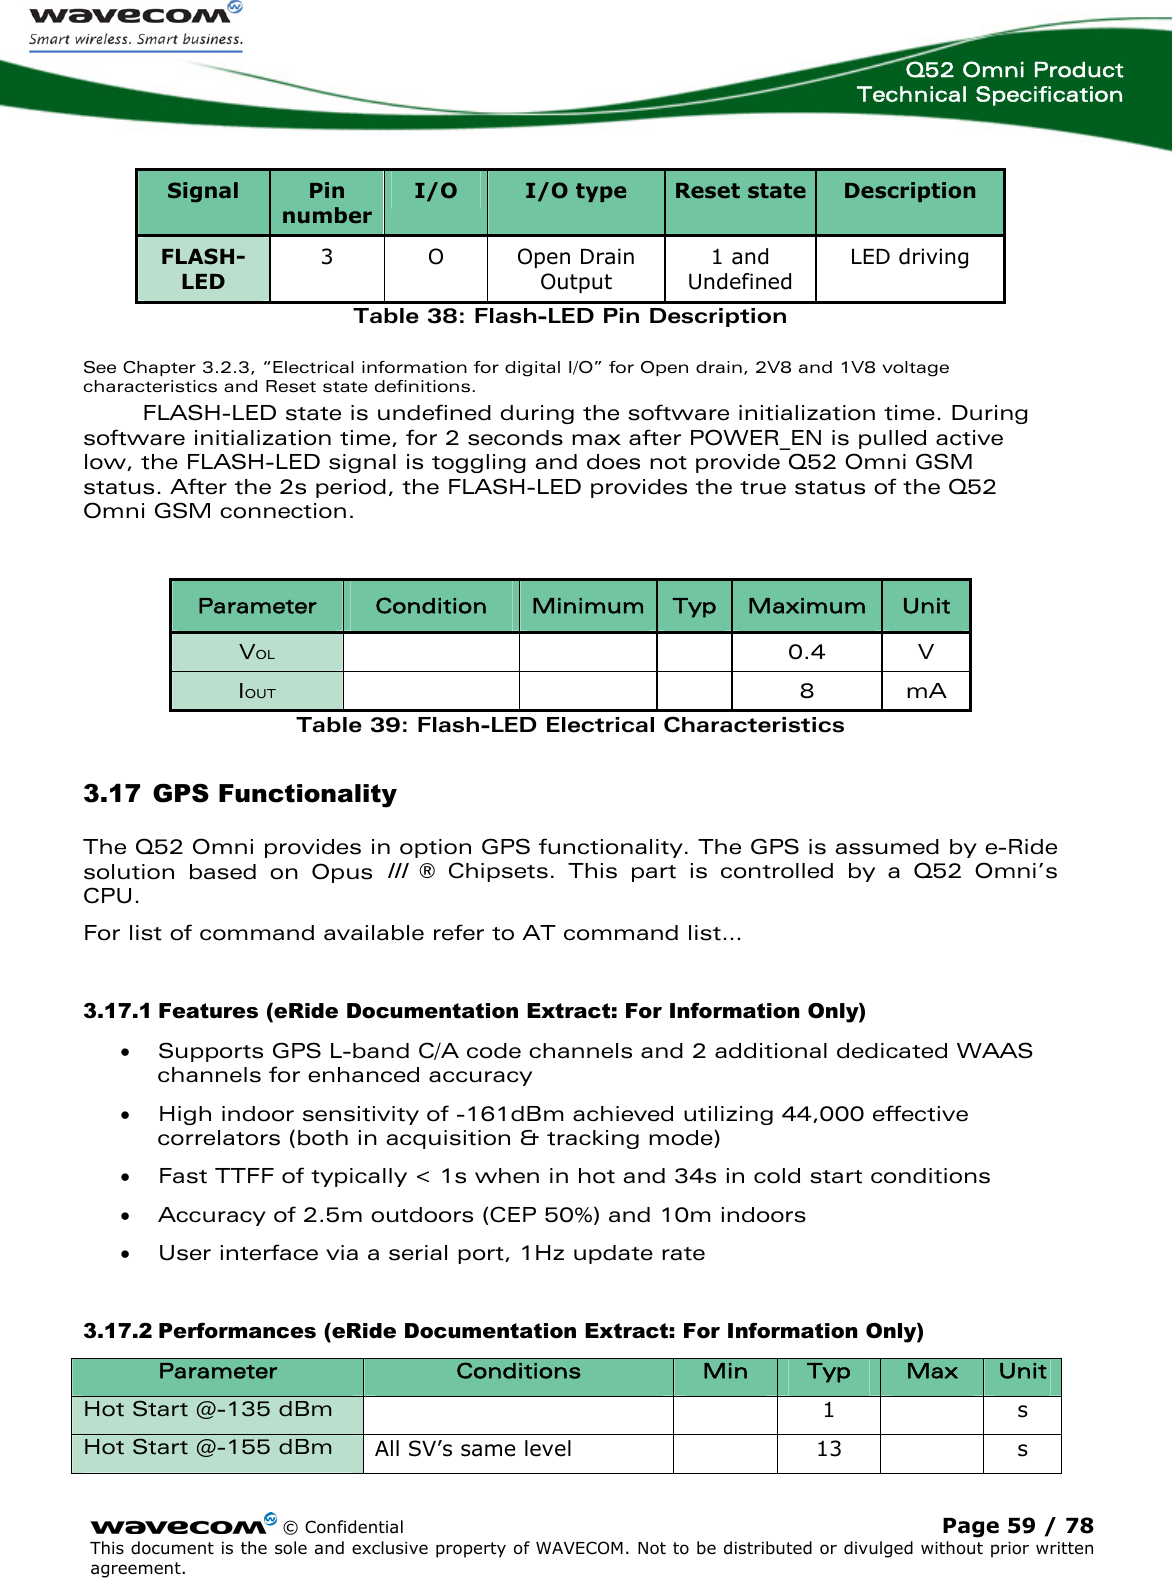  Q52 Omni Product Technical Specification    © Confidential Page 59 / 78 This document is the sole and exclusive property of WAVECOM. Not to be distributed or divulged without prior written agreement.   Signal  Pin number I/O  I/O type  Reset state Description FLASH-LED 3 O Open Drain Output 1 and Undefined LED driving Table 38: Flash-LED Pin Description See Chapter 3.2.3, “Electrical information for digital I/O” for Open drain, 2V8 and 1V8 voltage characteristics and Reset state definitions. FLASH-LED state is undefined during the software initialization time. During software initialization time, for 2 seconds max after POWER_EN is pulled active low, the FLASH-LED signal is toggling and does not provide Q52 Omni GSM status. After the 2s period, the FLASH-LED provides the true status of the Q52 Omni GSM connection.  Parameter  Condition  Minimum Typ  Maximum  Unit VOL    0.4 V IOUT    8 mA Table 39: Flash-LED Electrical Characteristics 3.17 GPS Functionality The Q52 Omni provides in option GPS functionality. The GPS is assumed by e-Ride solution based on Opus III ® Chipsets. This part is controlled by a Q52 Omni’s CPU.  For list of command available refer to AT command list… 3.17.1 Features (eRide Documentation Extract: For Information Only) • Supports GPS L-band C/A code channels and 2 additional dedicated WAAS channels for enhanced accuracy • High indoor sensitivity of -161dBm achieved utilizing 44,000 effective correlators (both in acquisition &amp; tracking mode) • Fast TTFF of typically &lt; 1s when in hot and 34s in cold start conditions • Accuracy of 2.5m outdoors (CEP 50%) and 10m indoors • User interface via a serial port, 1Hz update rate 3.17.2 Performances (eRide Documentation Extract: For Information Only) Parameter  Conditions  Min  Typ  Max  Unit Hot Start @-135 dBm      1  s Hot Start @-155 dBm  All SV’s same level    13    s 